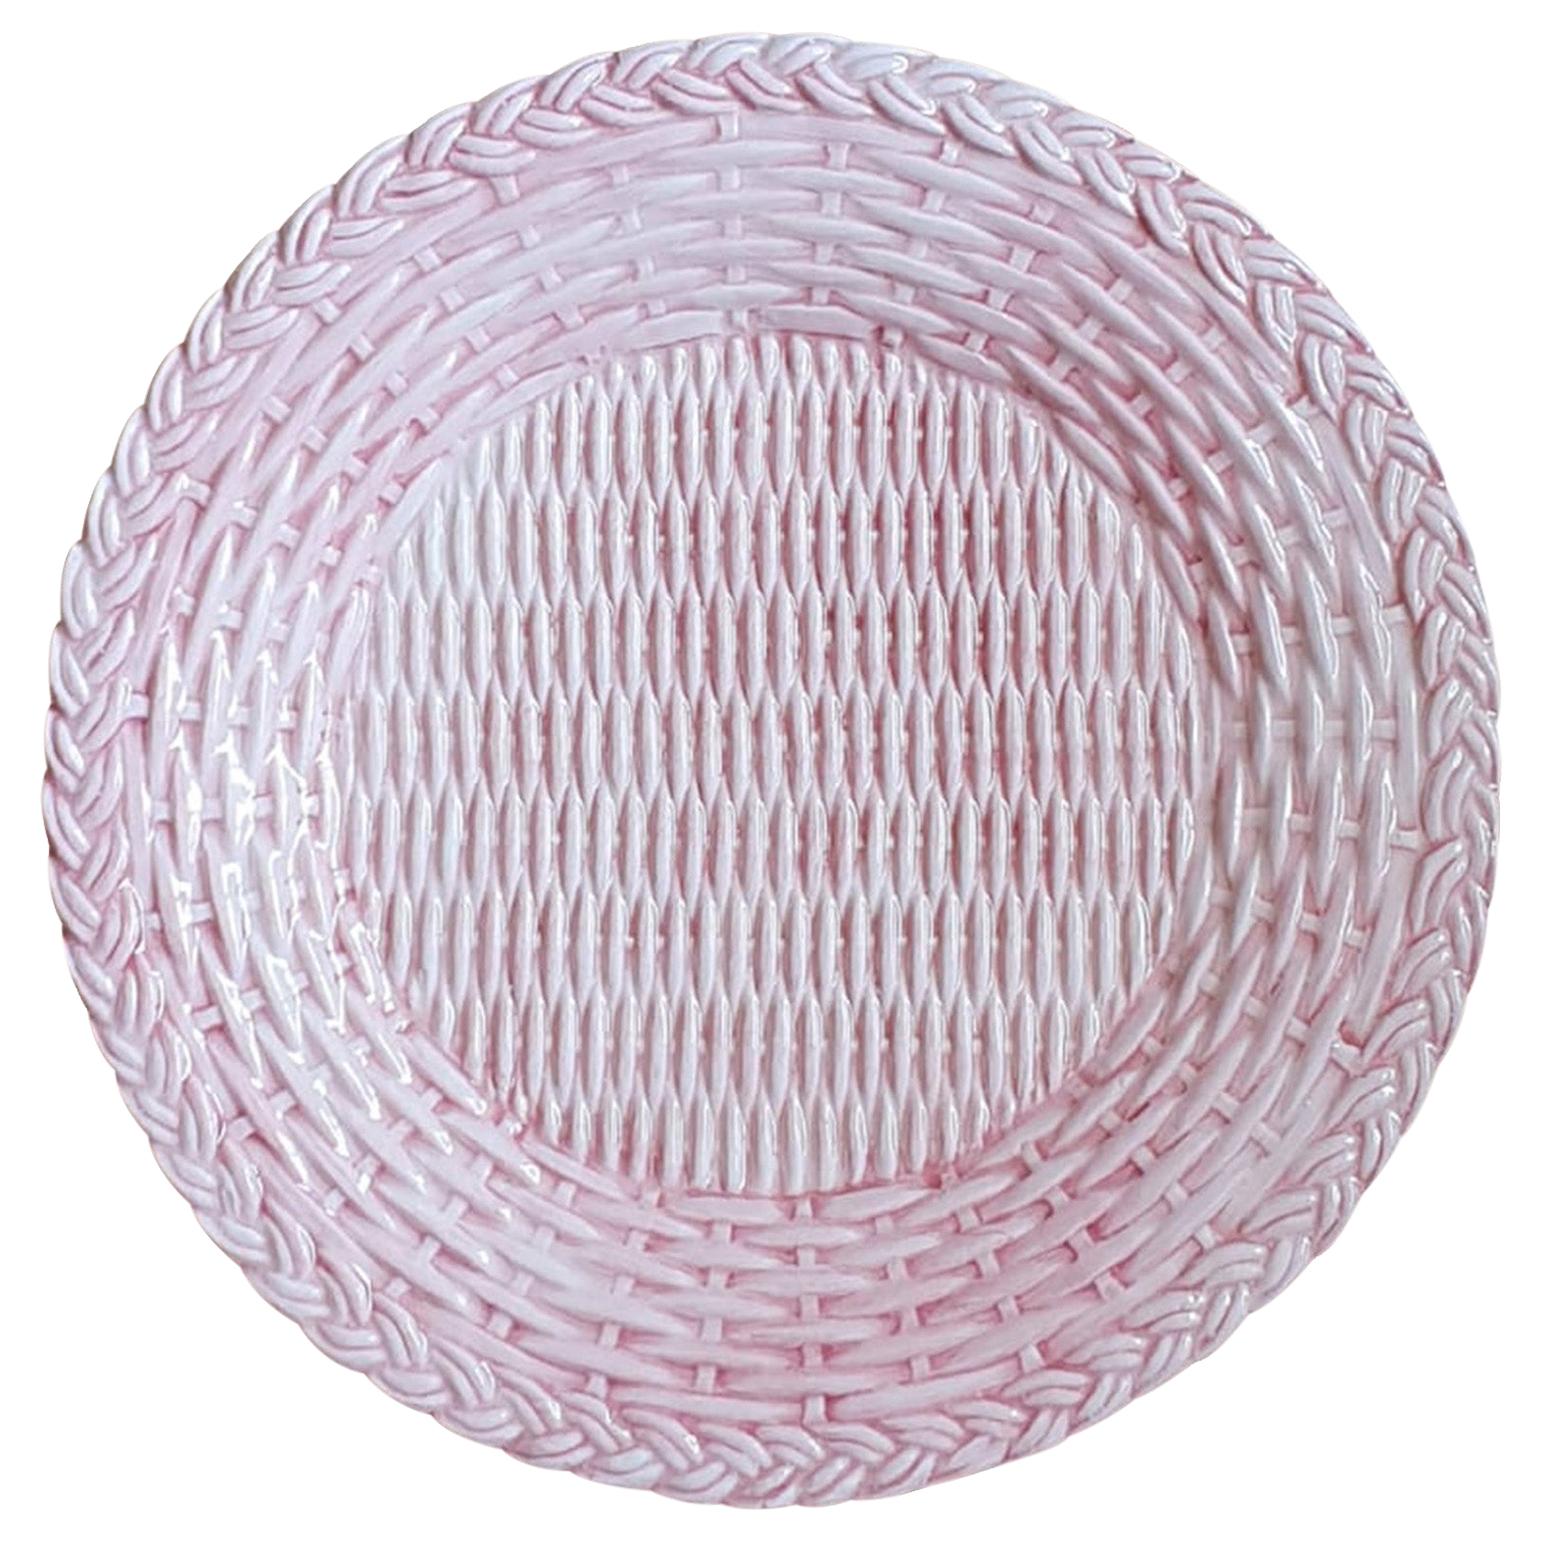 Set of 4 Ceramic Dinner Wicker Pink Plates Made in Italy